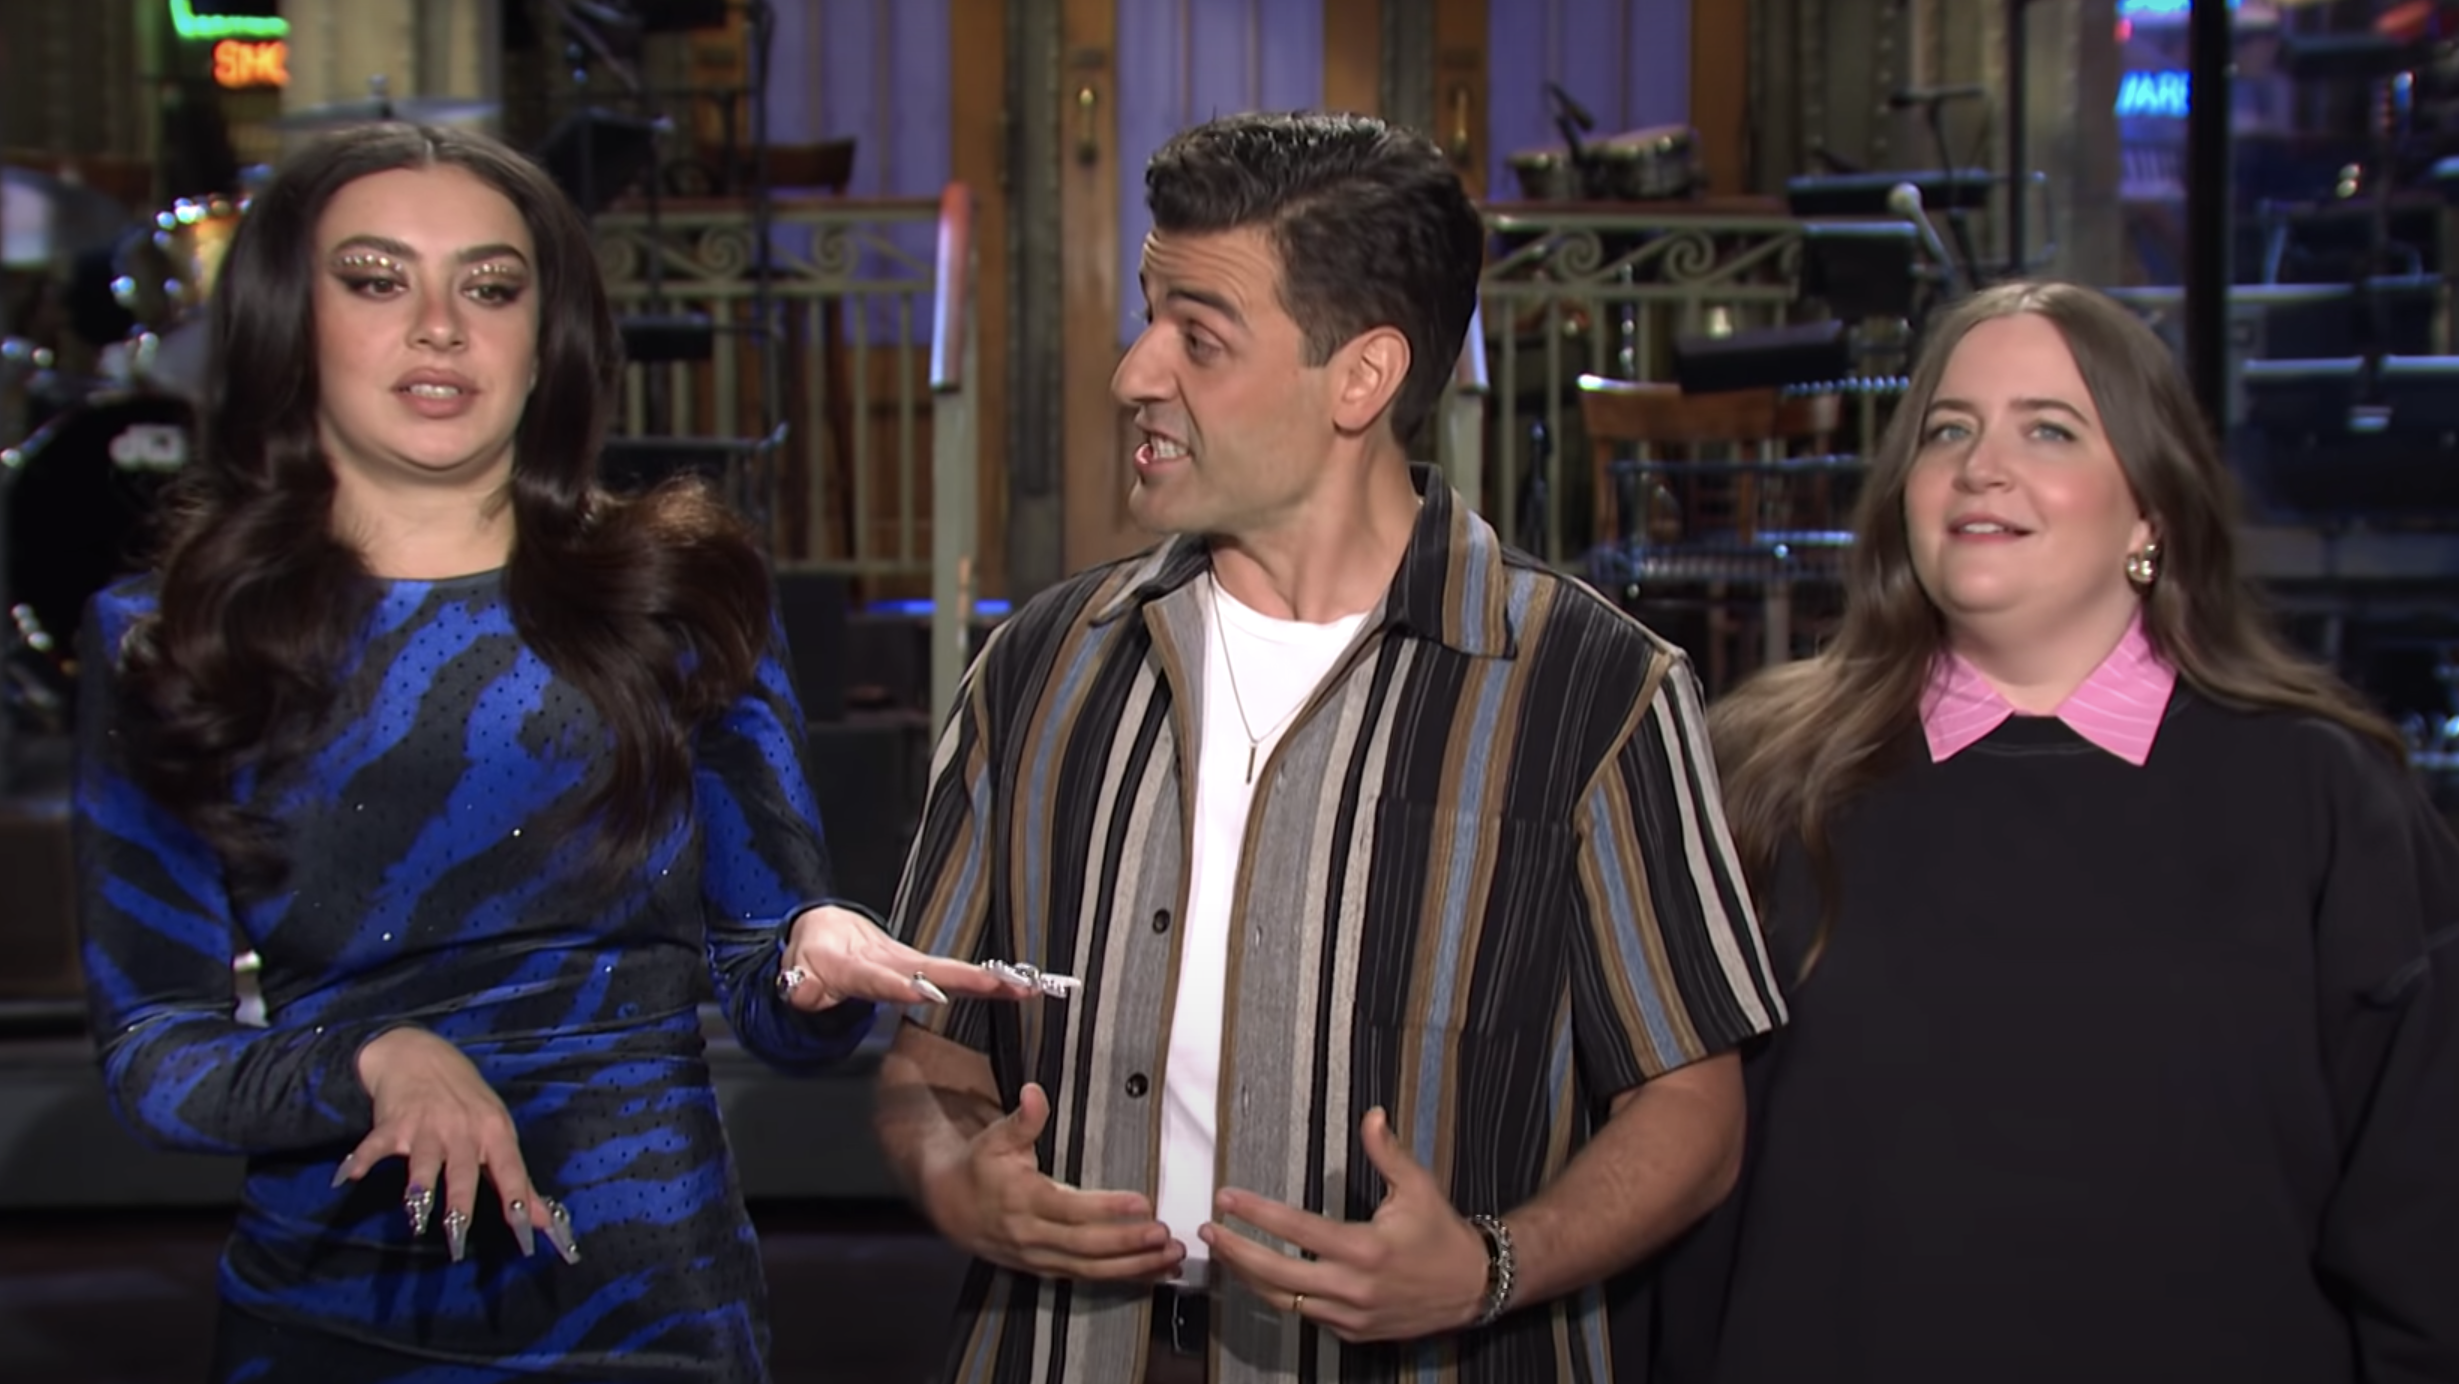 Oscar Isaac and Aidy Bryant tease Charli XCX ahead of this weekend’s Saturday Night Live